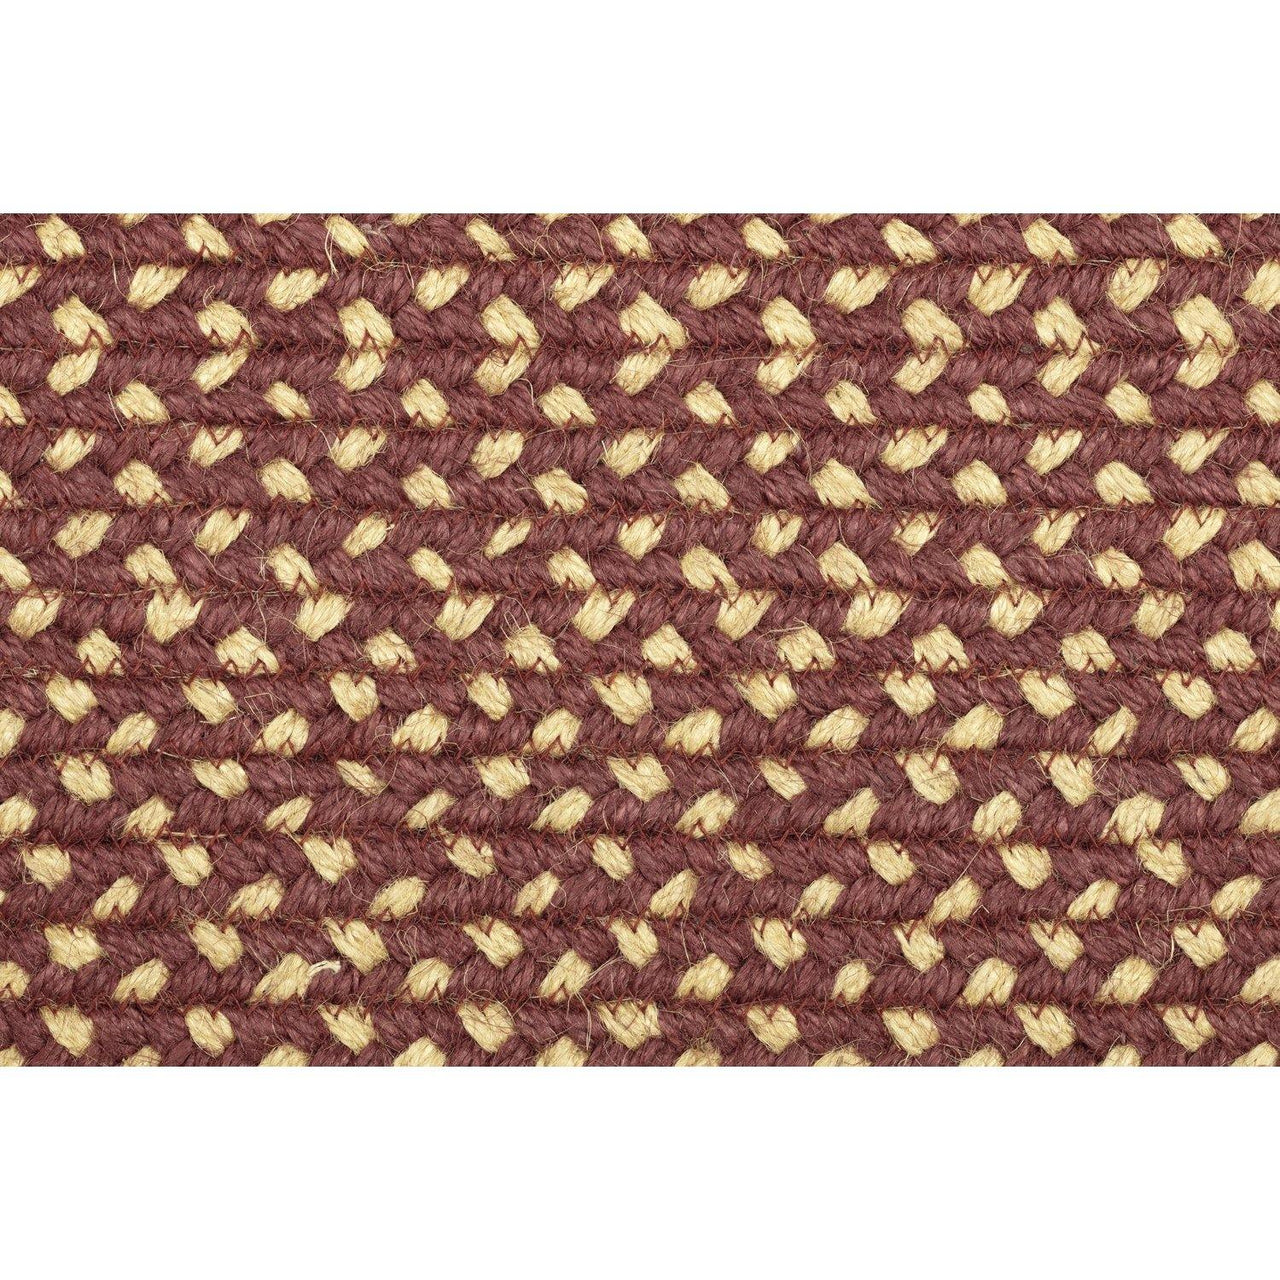 Burgundy Red Primitive Jute Braided Rug Rect 27"x48" with Rug Pad VHC Brands - The Fox Decor